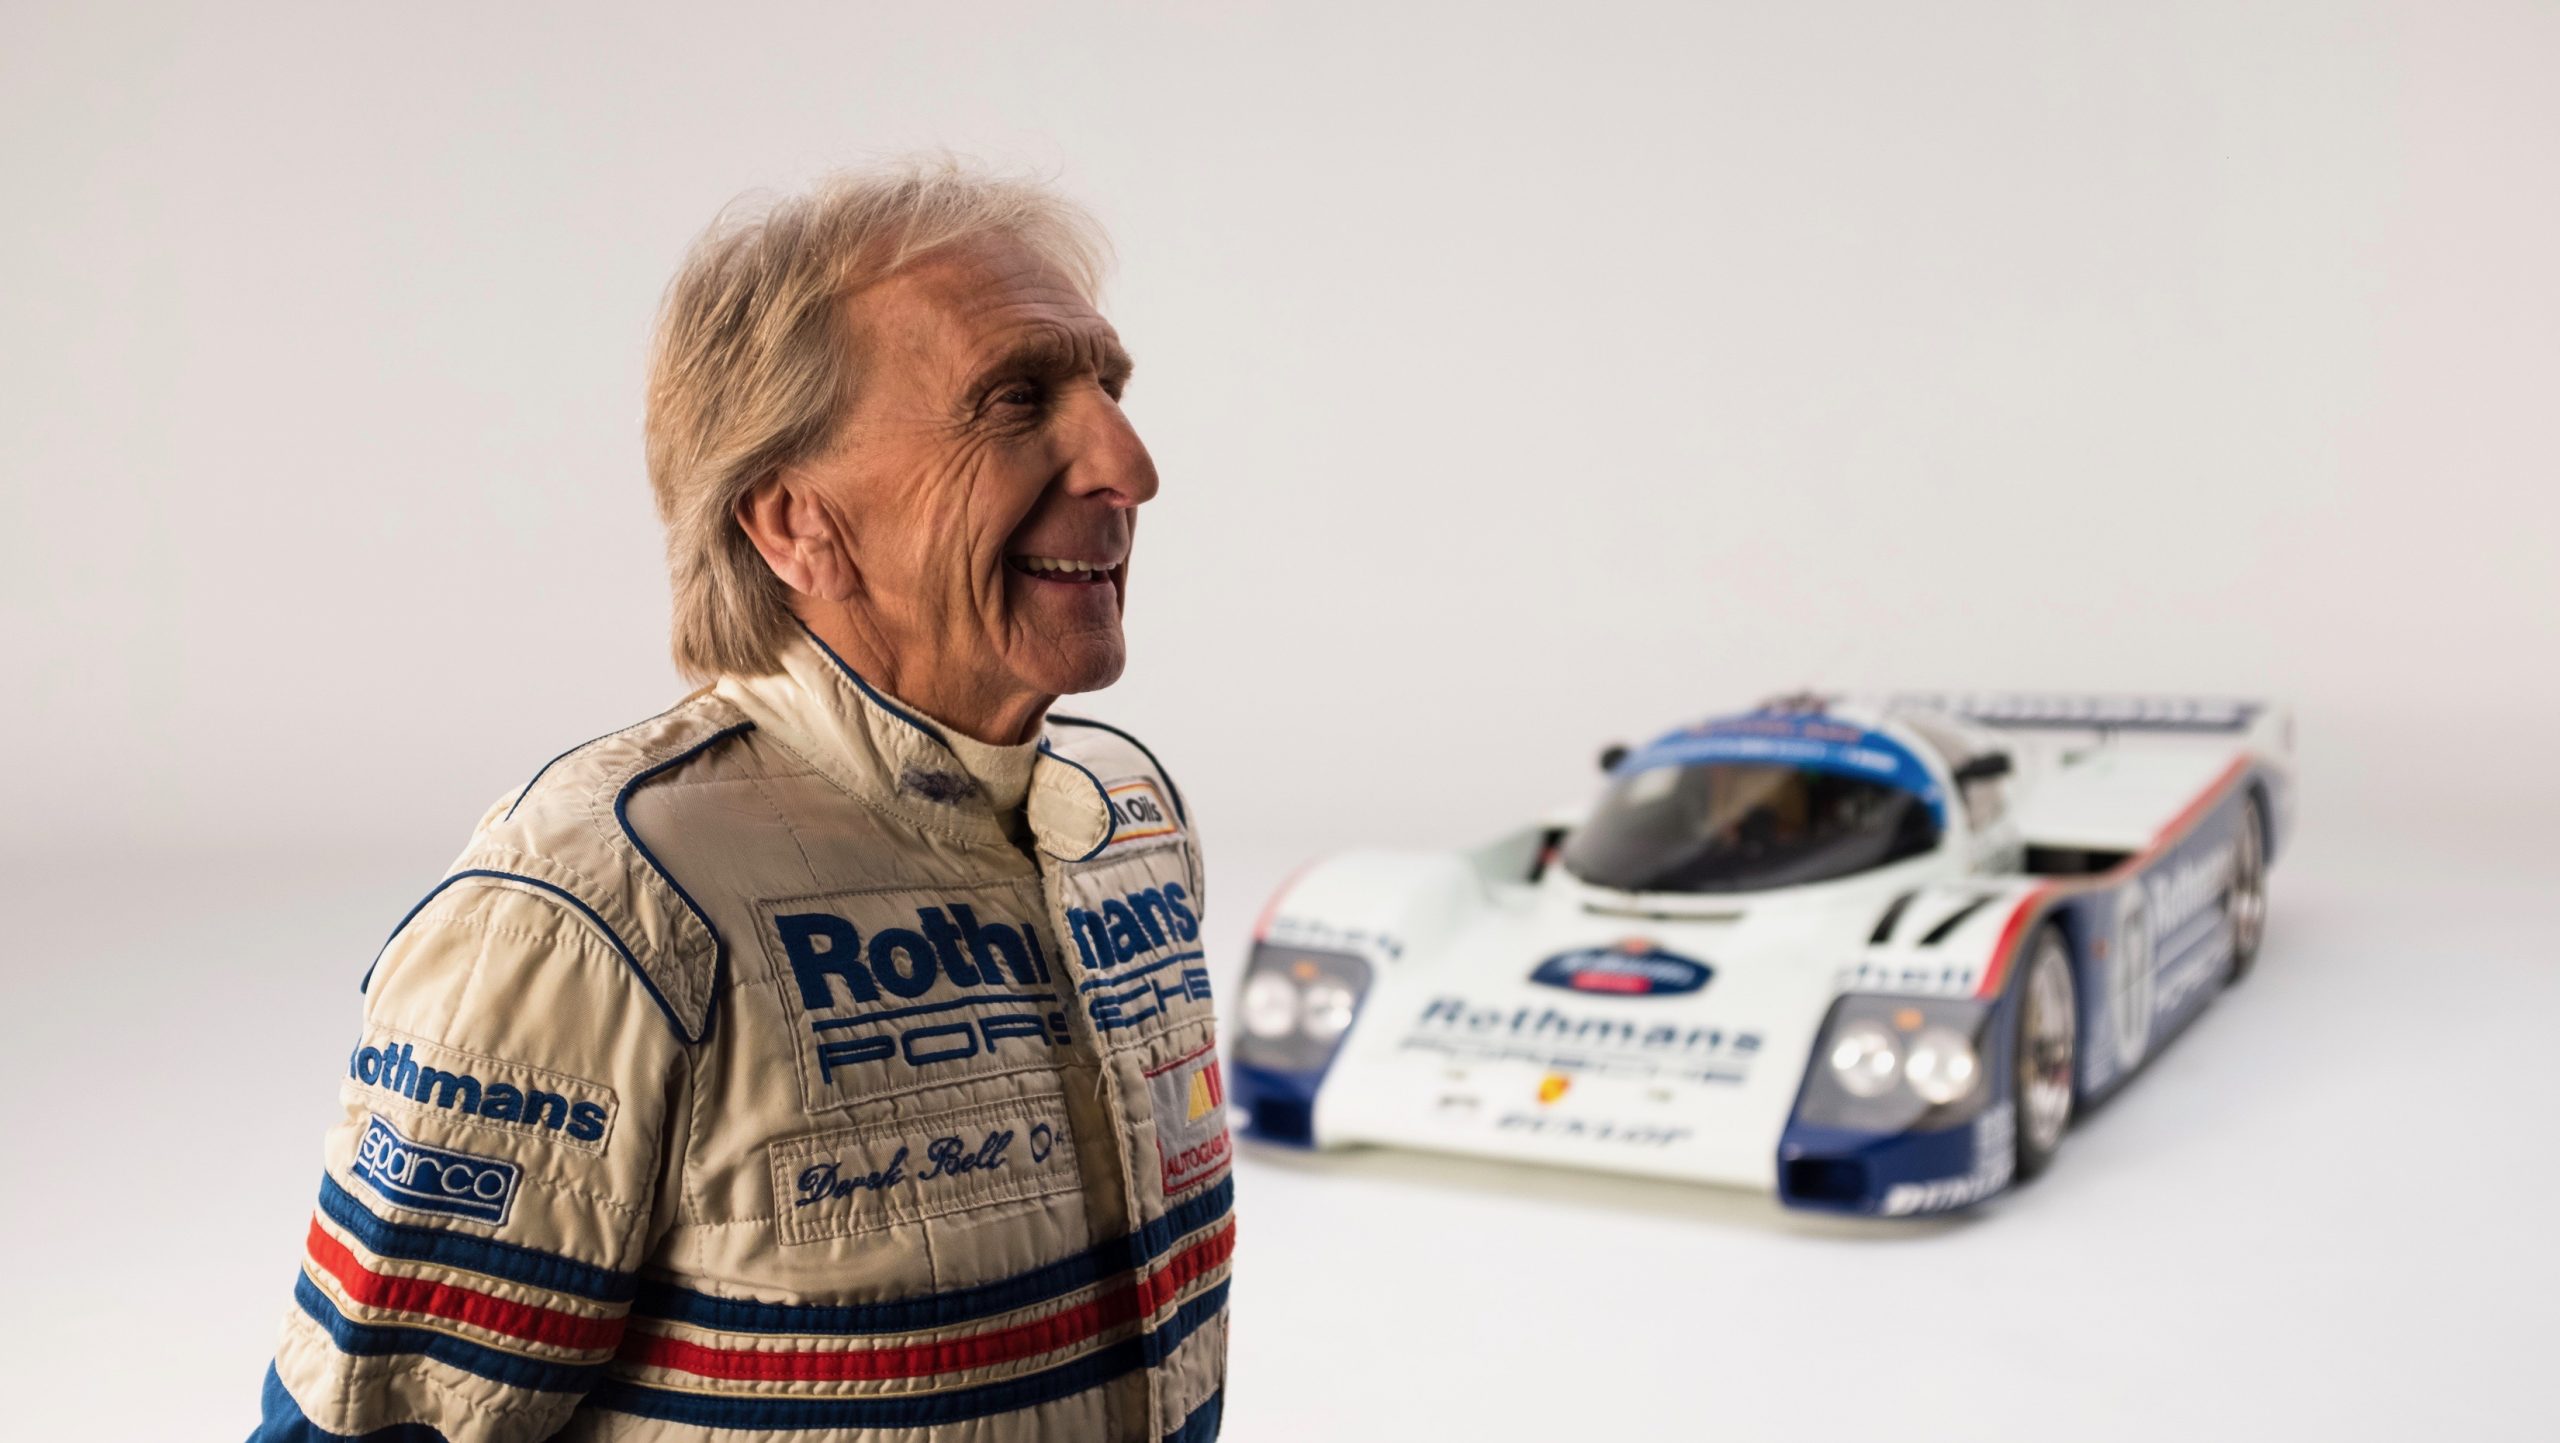 ‘We are never wrong’: Derek Bell on how Porsche created the world-beating 956 Group C car